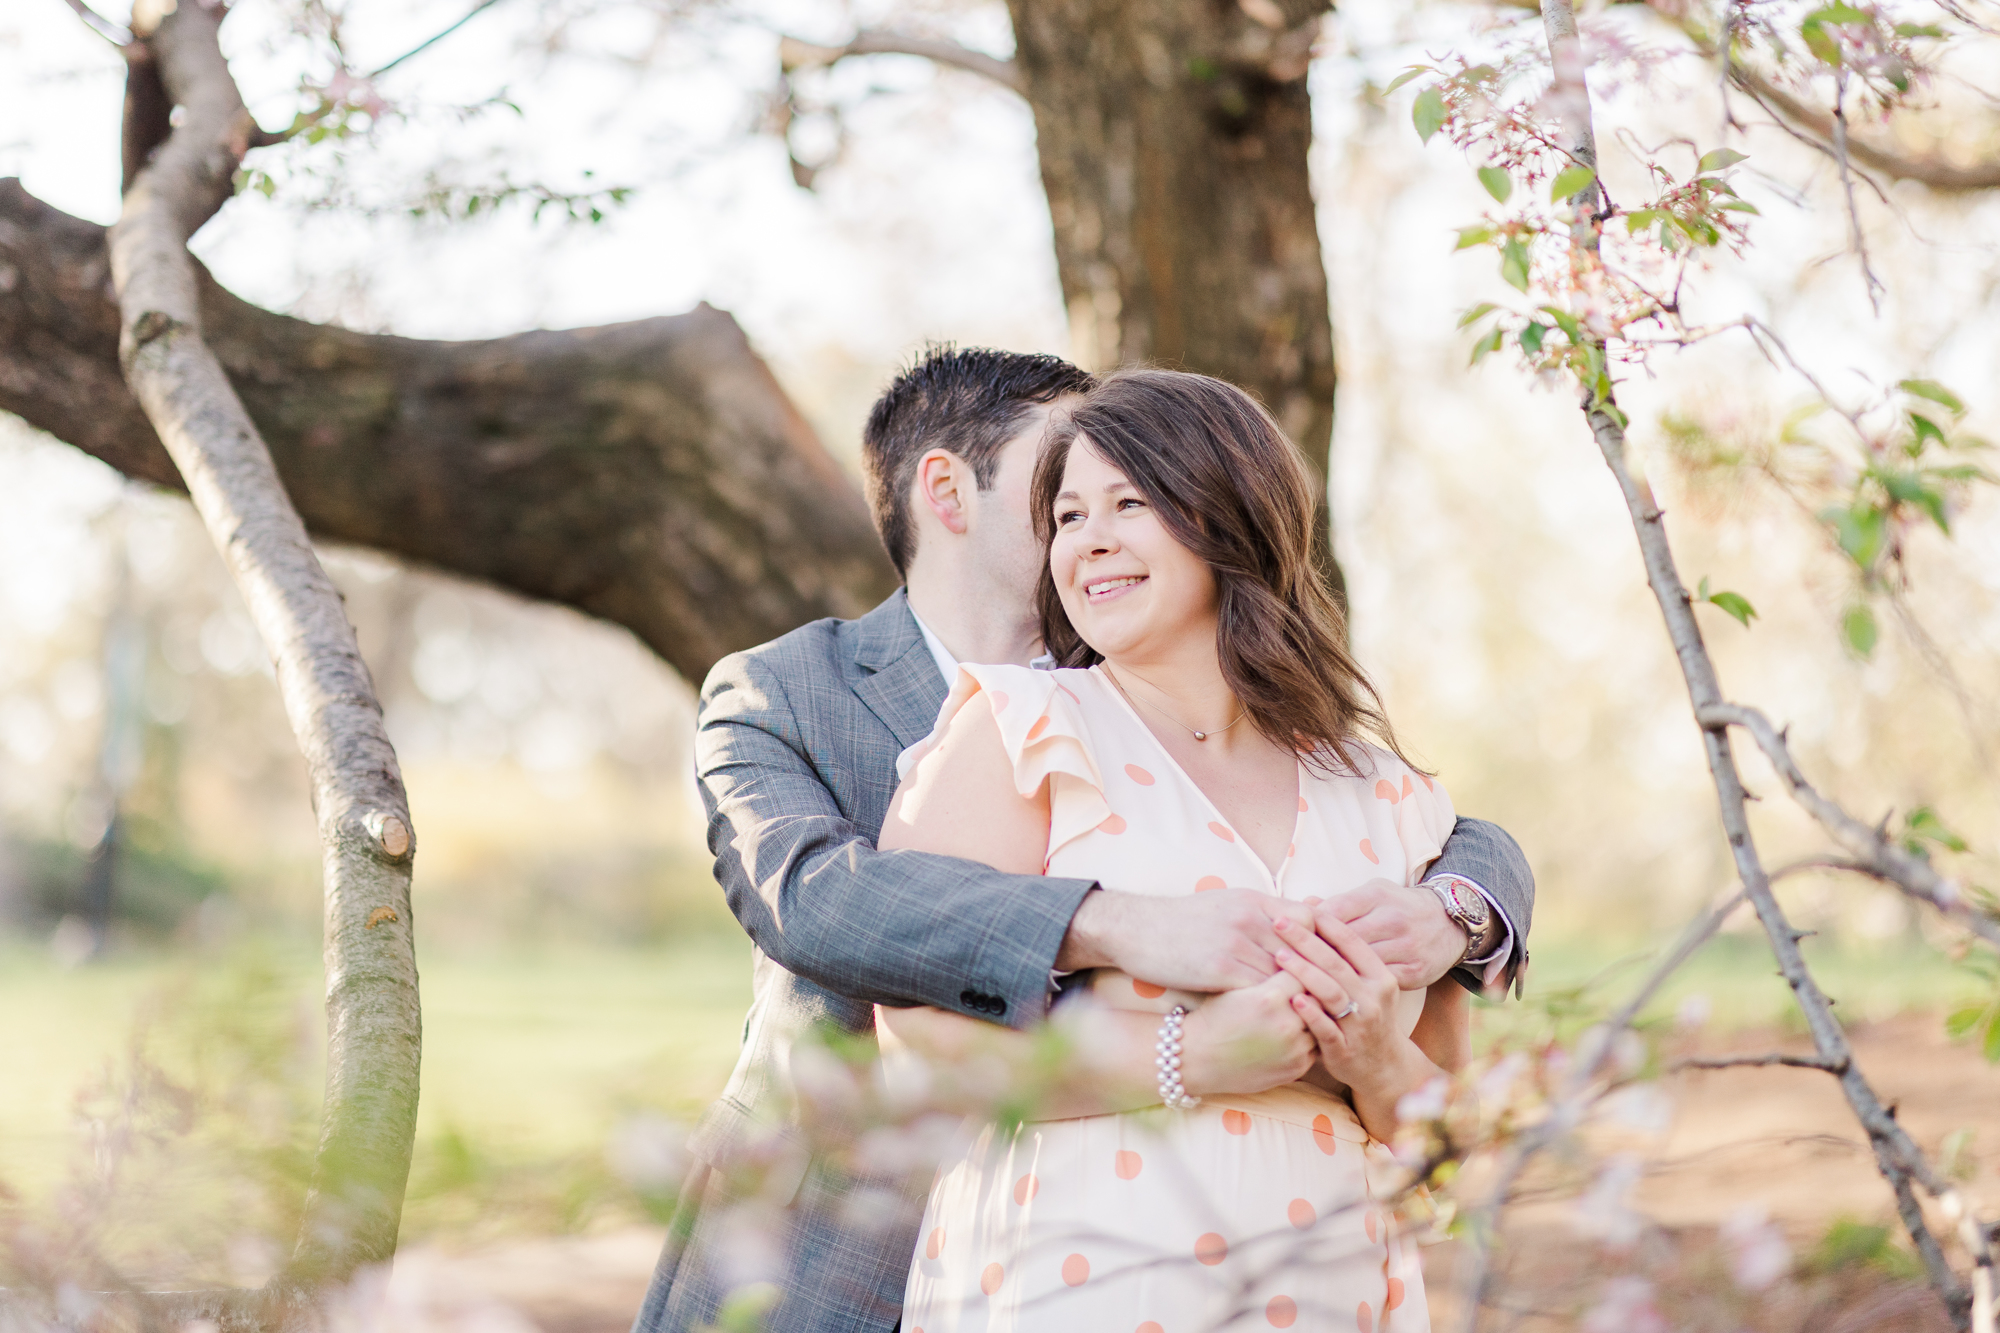 Cute Pose Ideas for your Engagement Session